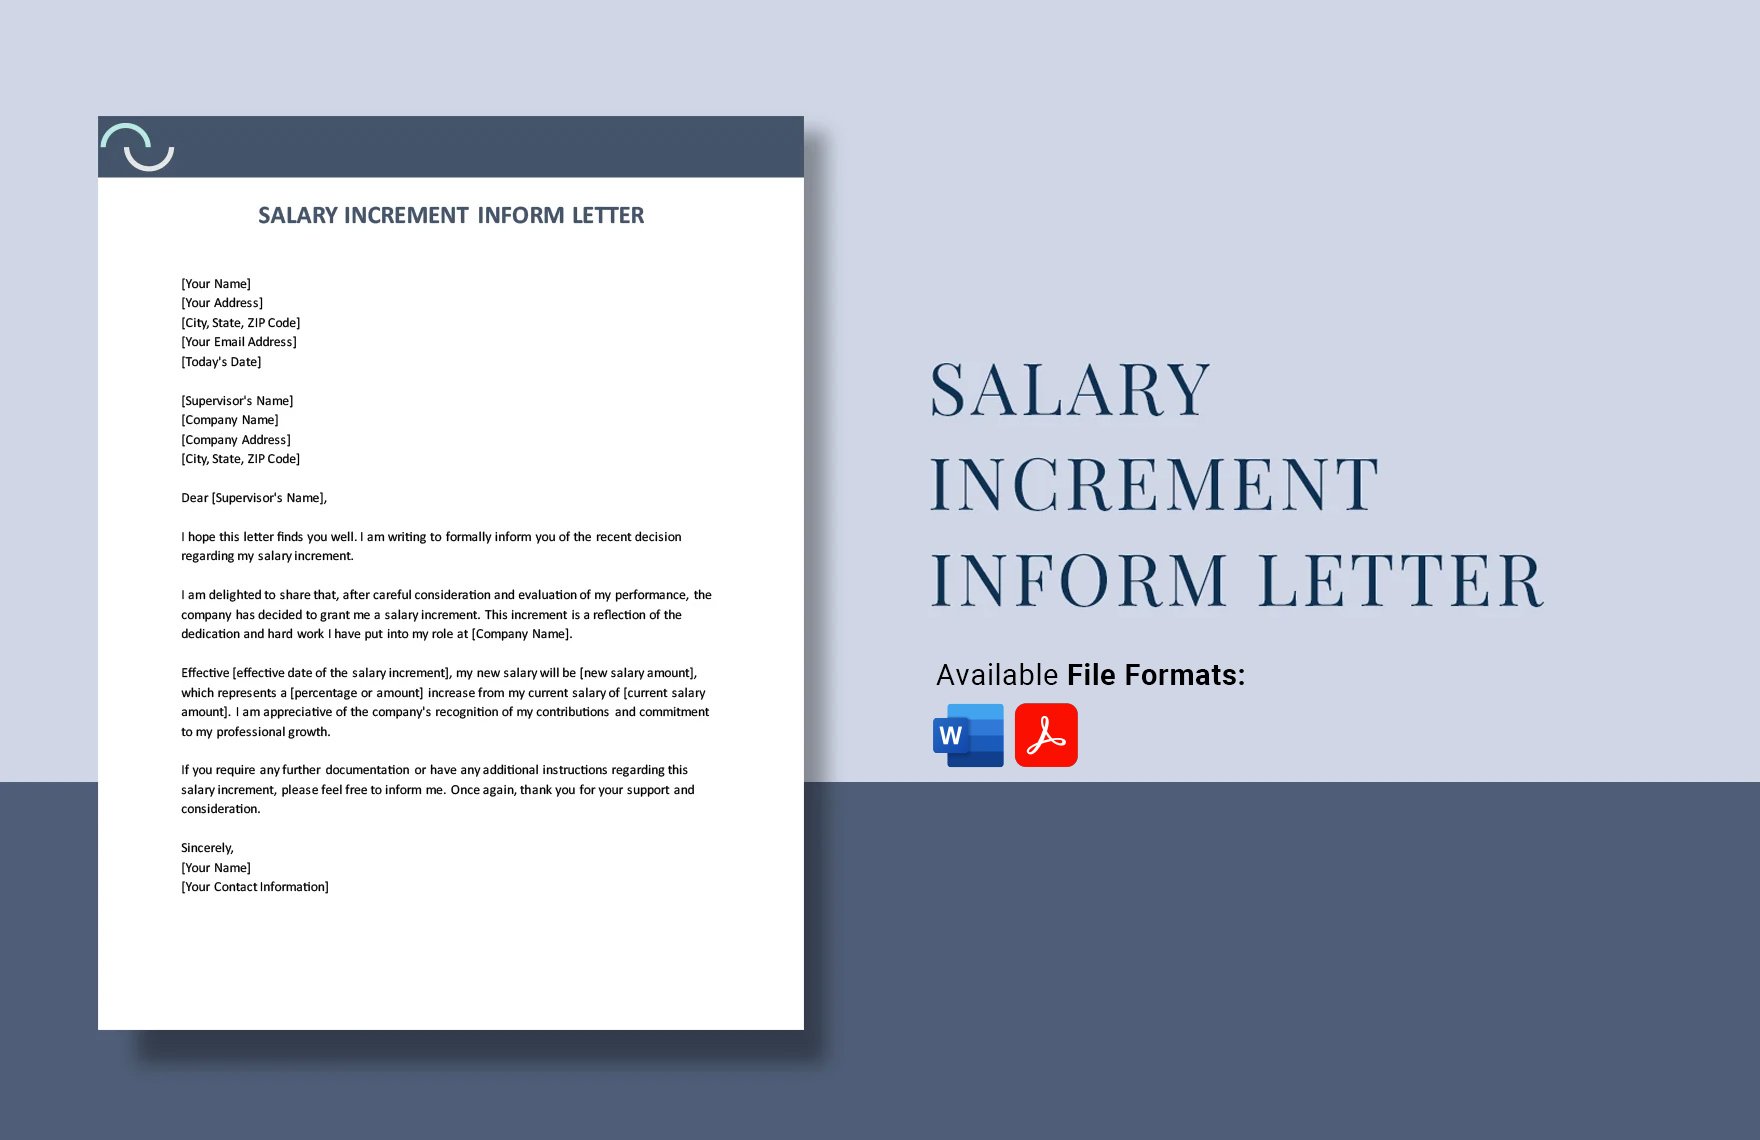 Salary Increment Inform Letter in Word, PDF